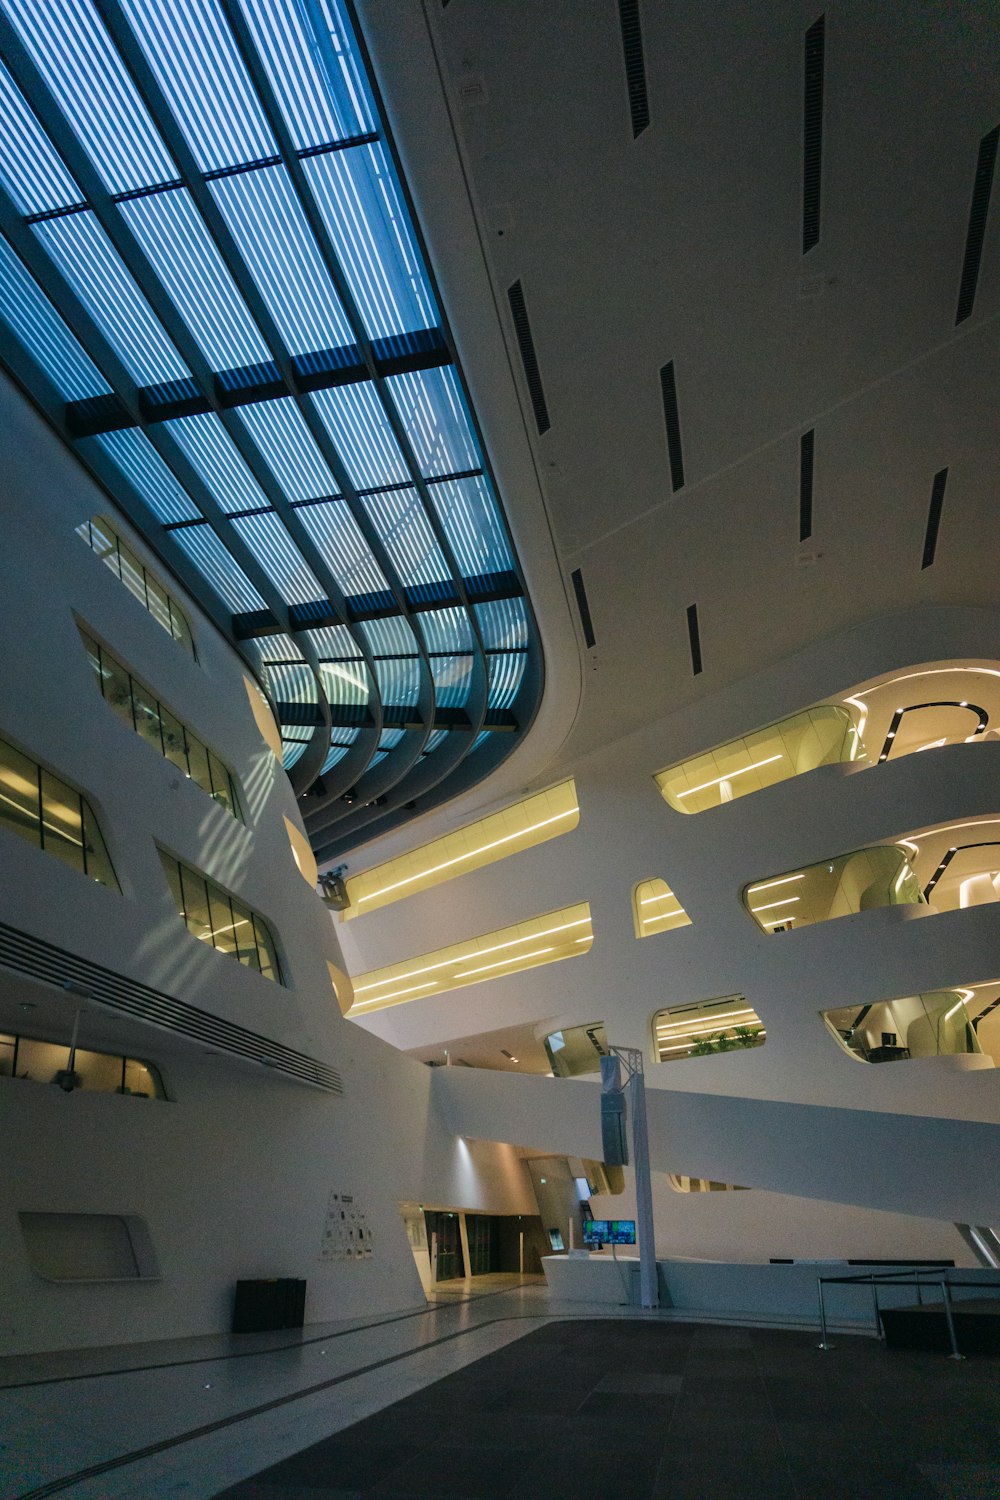 the interior of a large building with a skylight